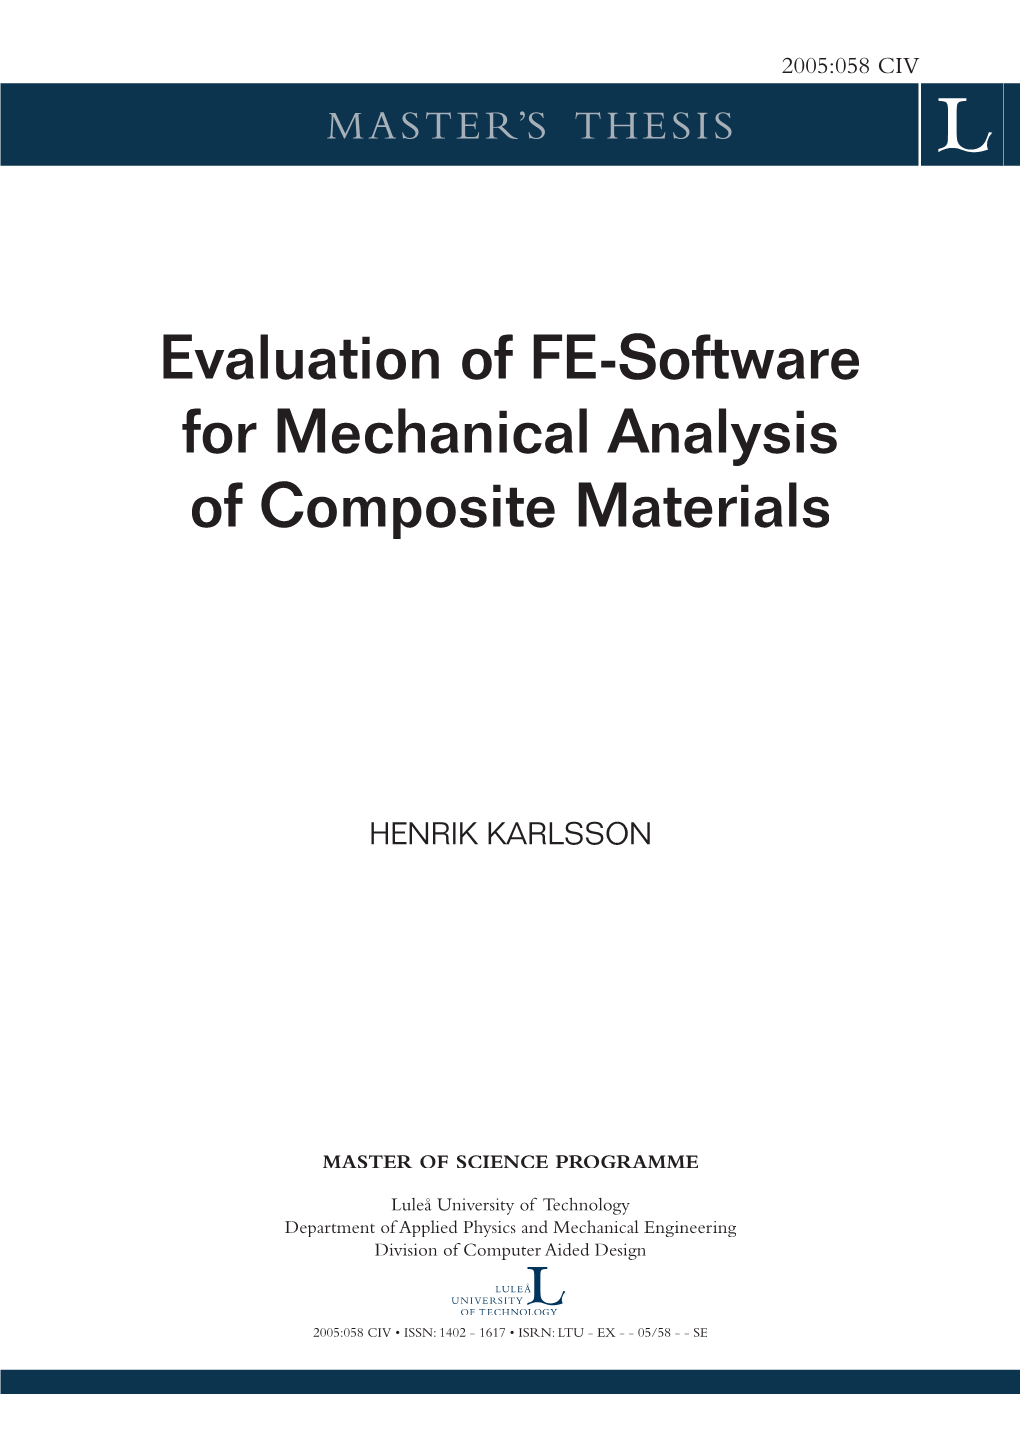 Evaluation of FE-Software for Mechanical Analysis of Composite Materials